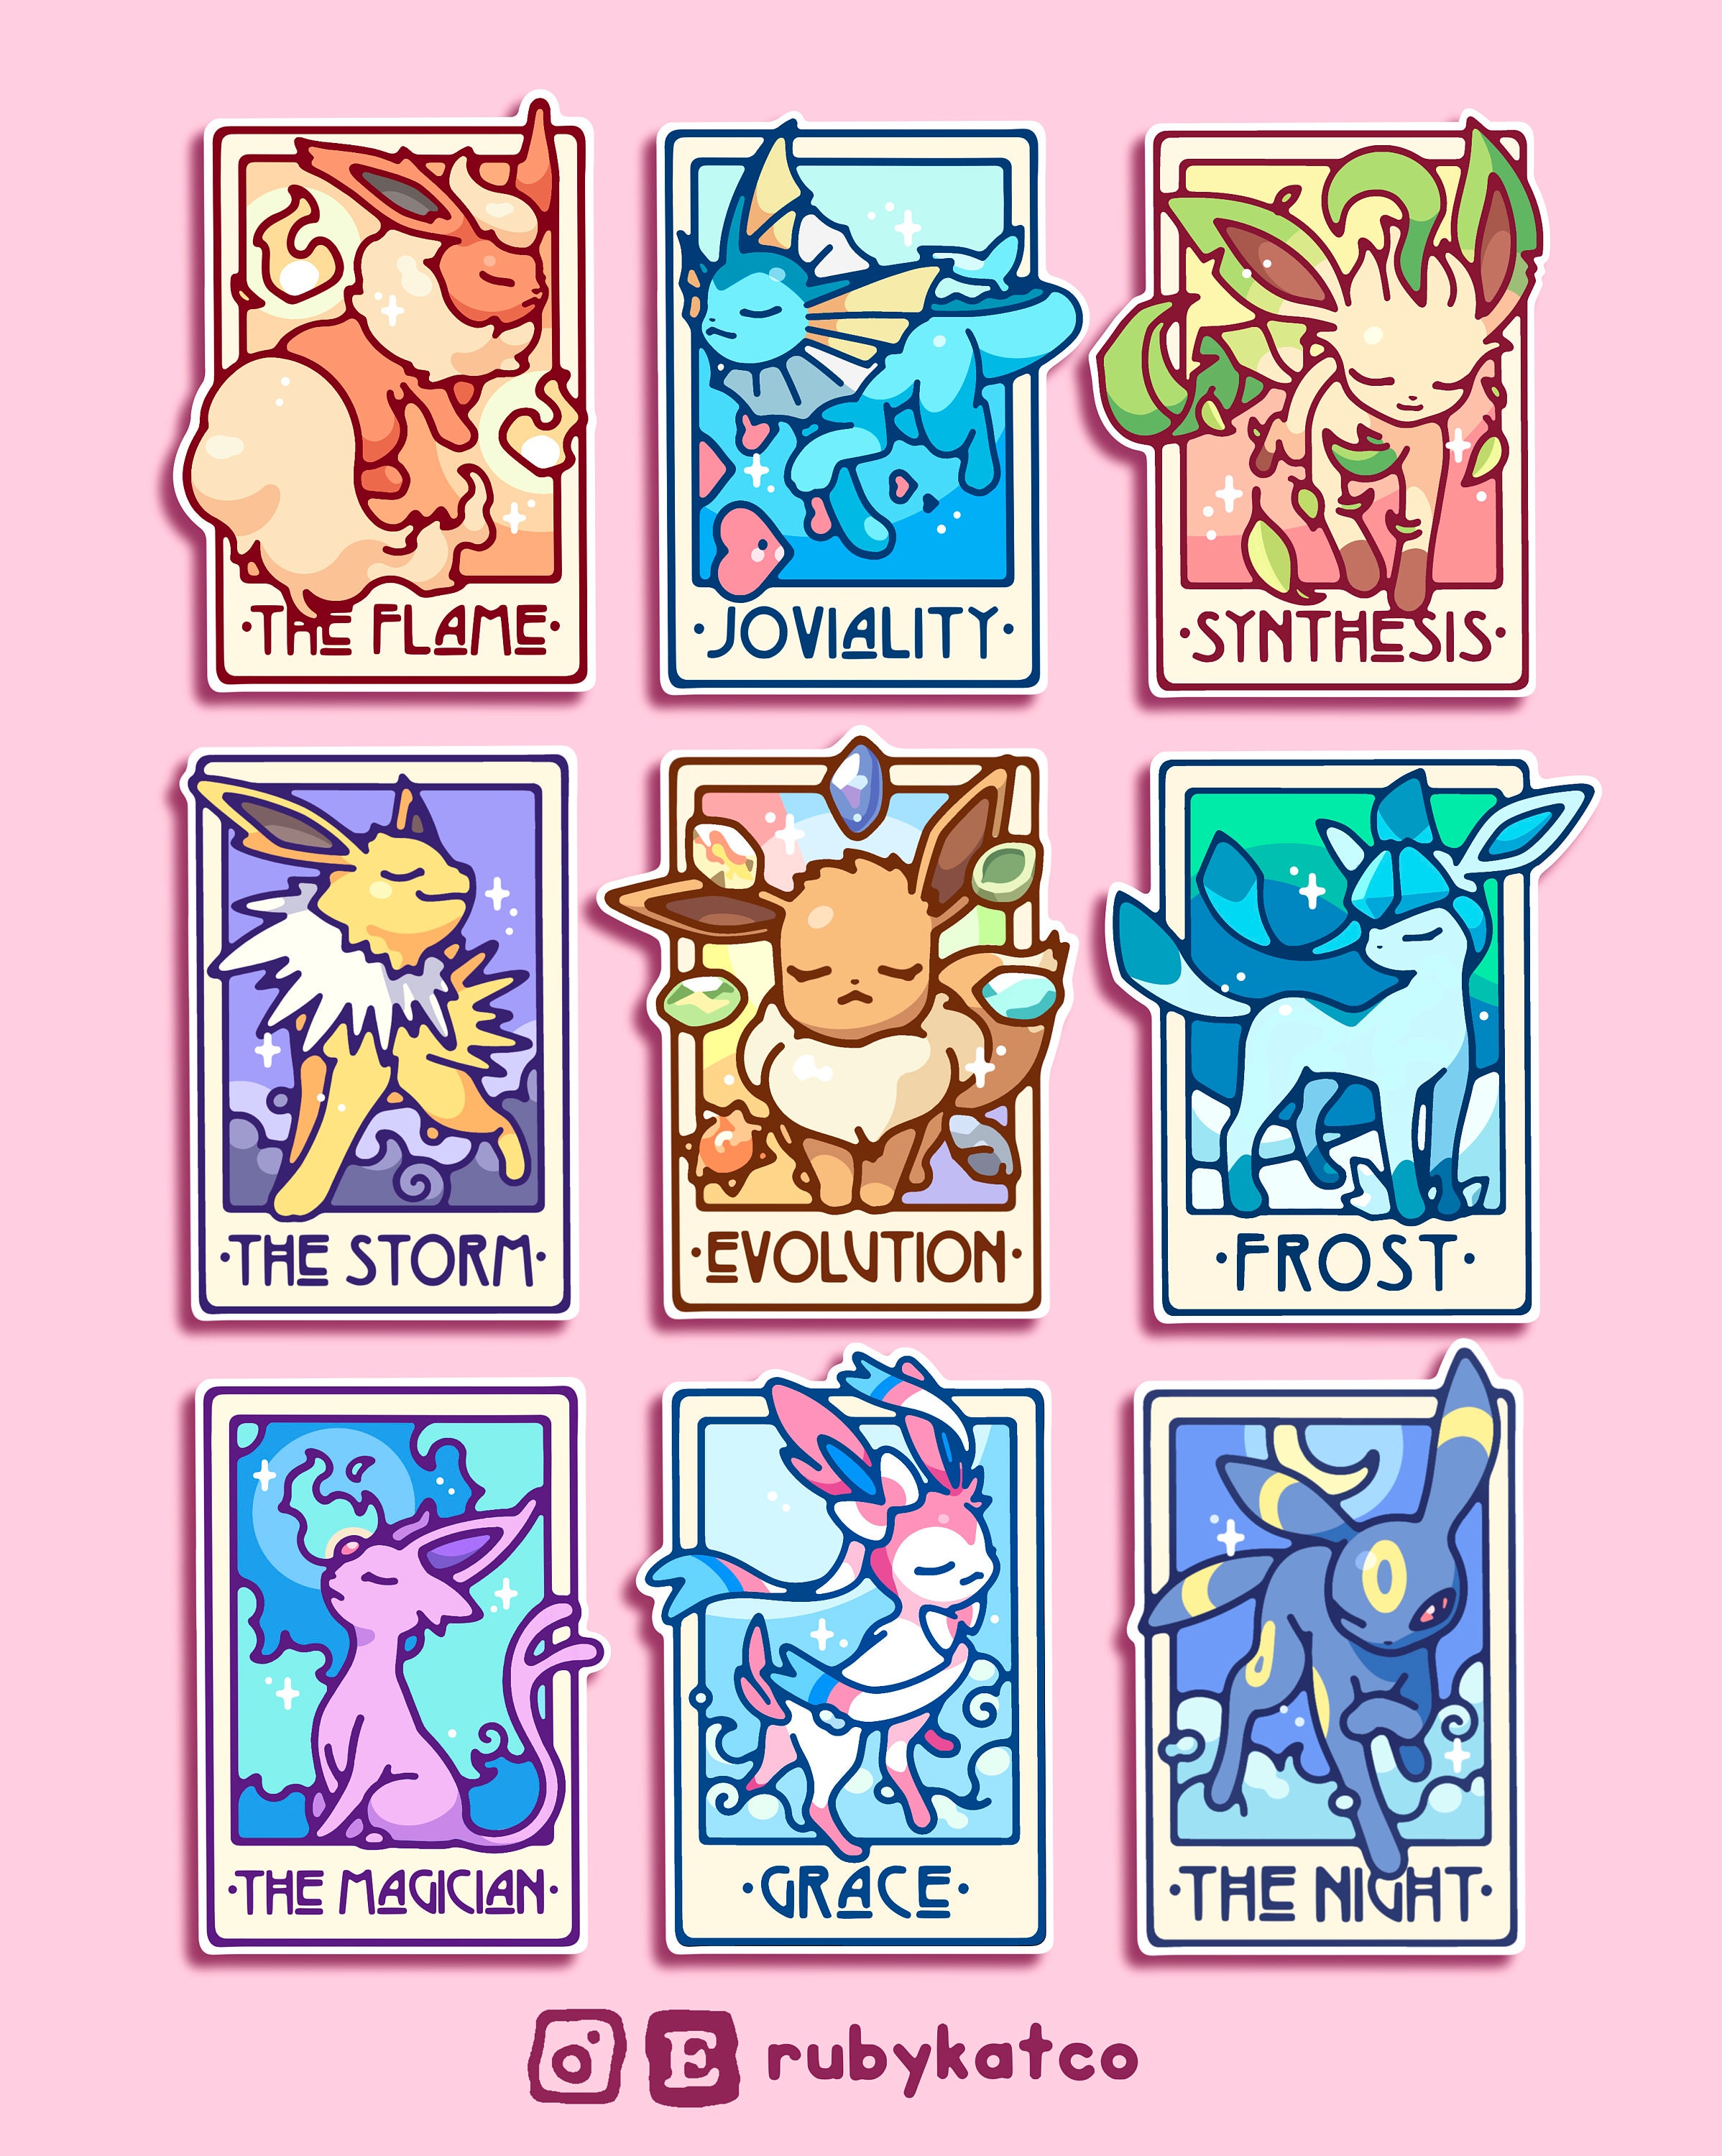 More Eeveelutions! ❤️ Which one is your favorite one